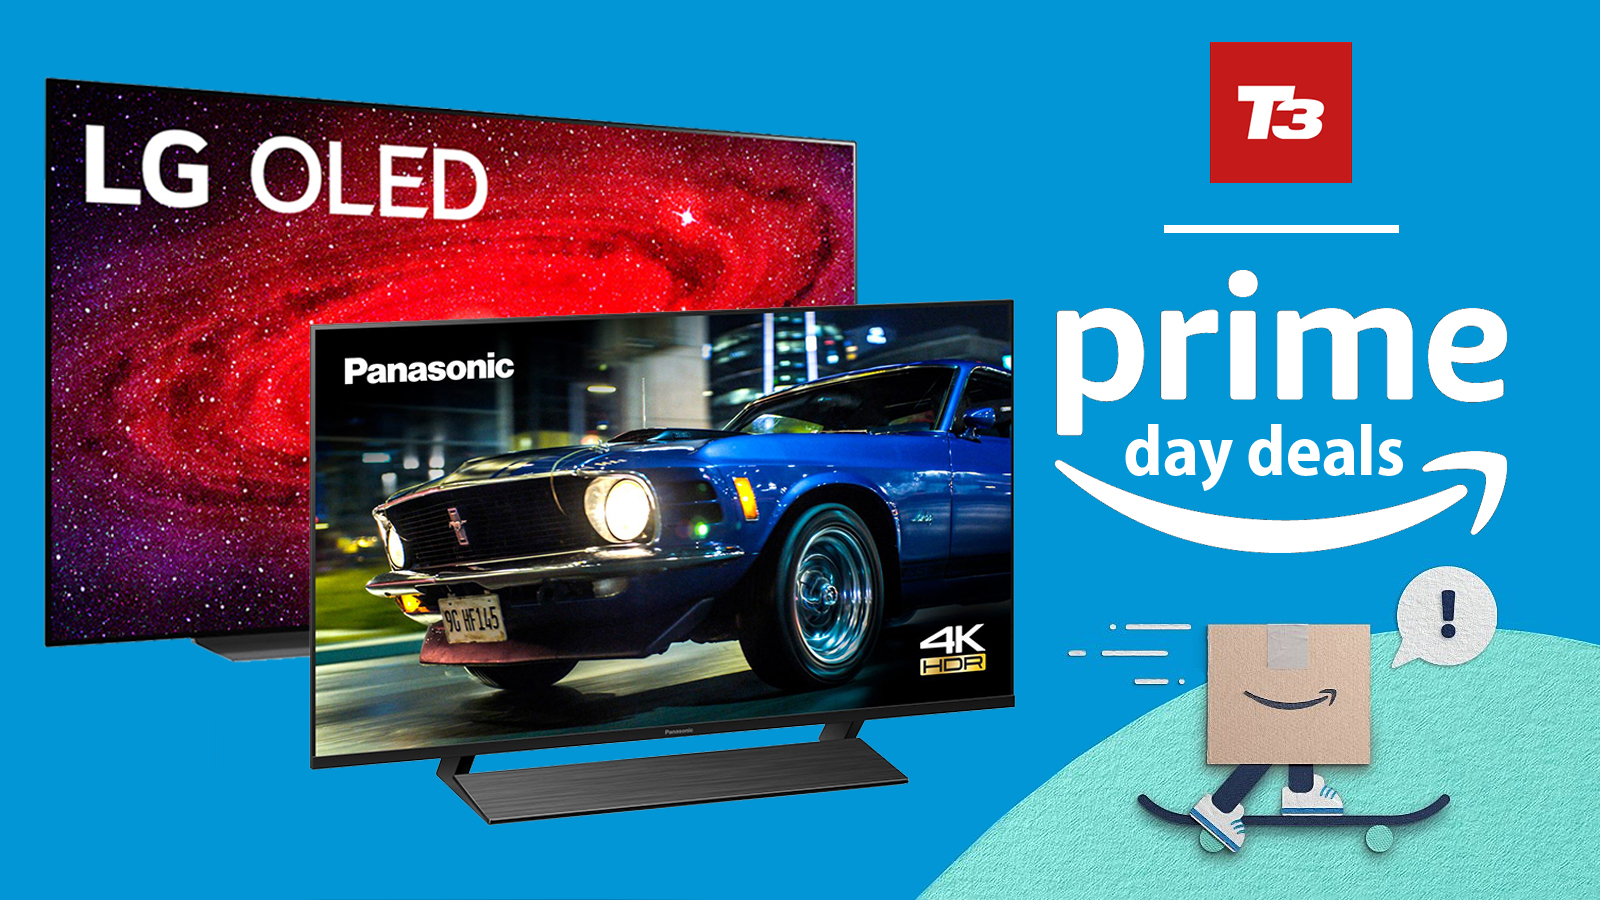 The best Prime Day TV deals 2021 updated with new offers! T3